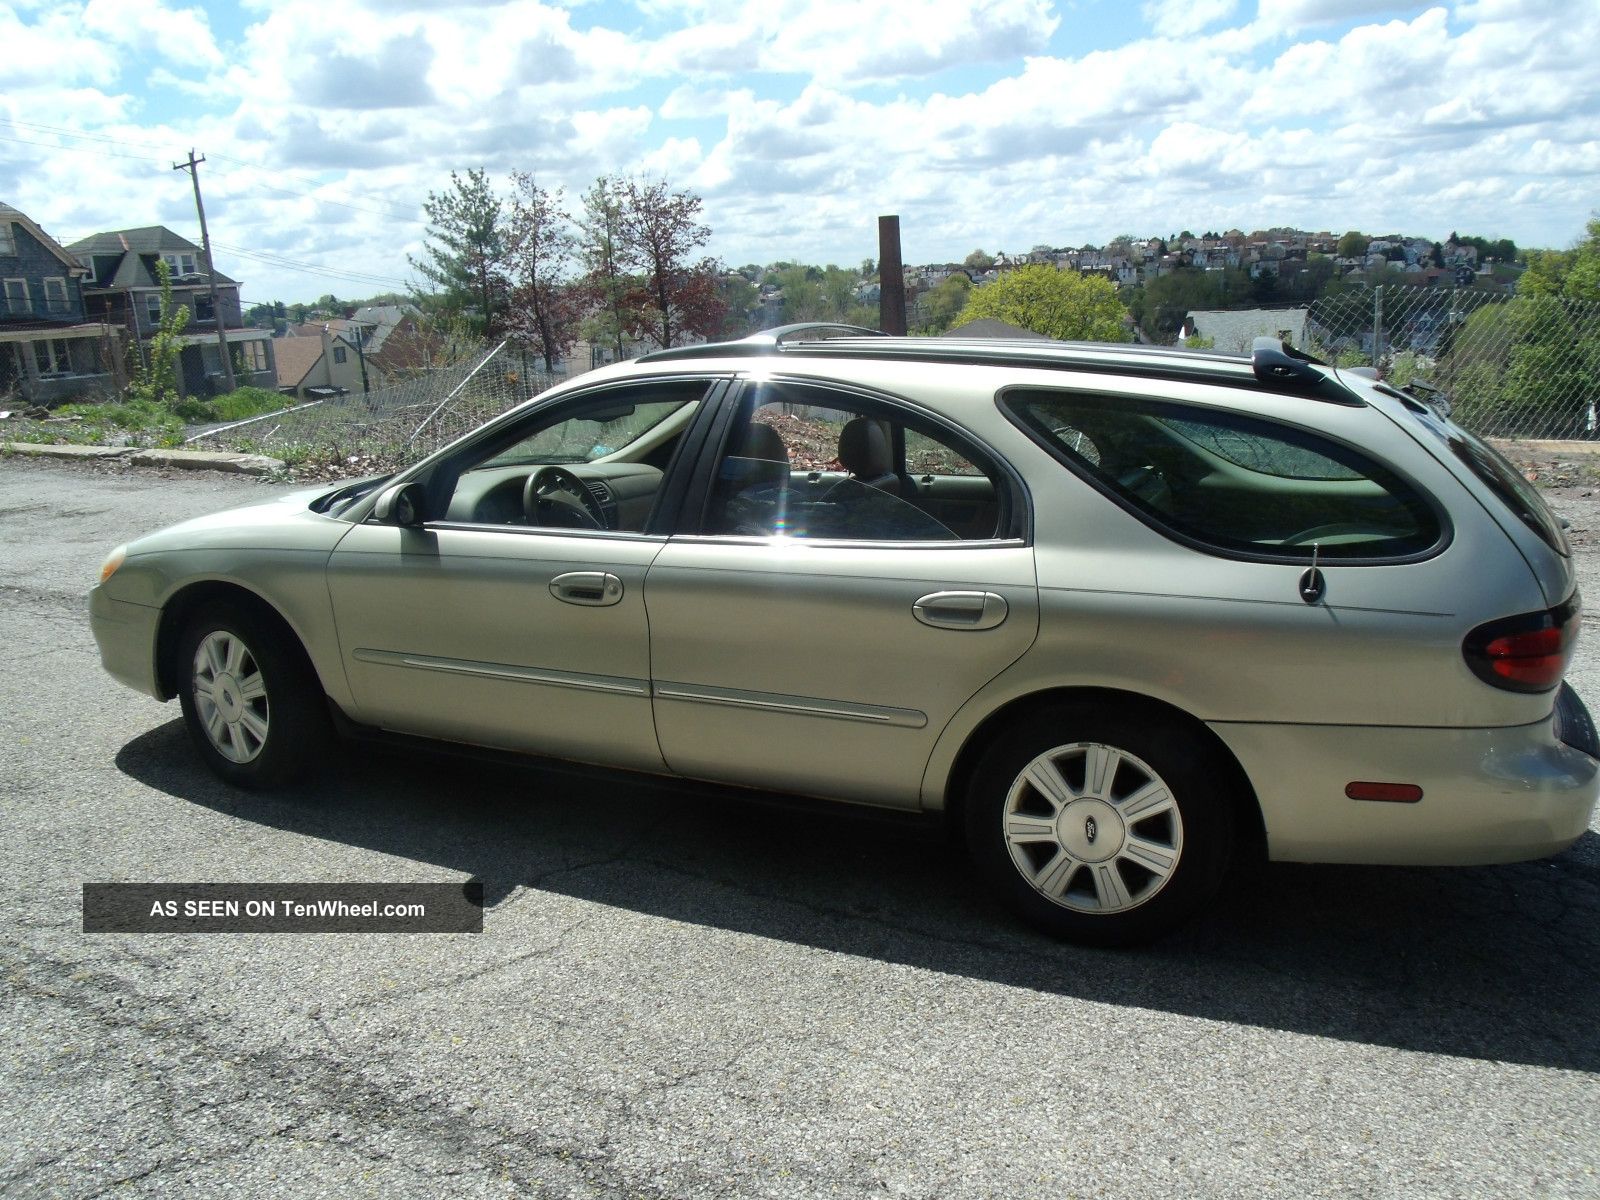 2003 Ford taurus se wagon review #6